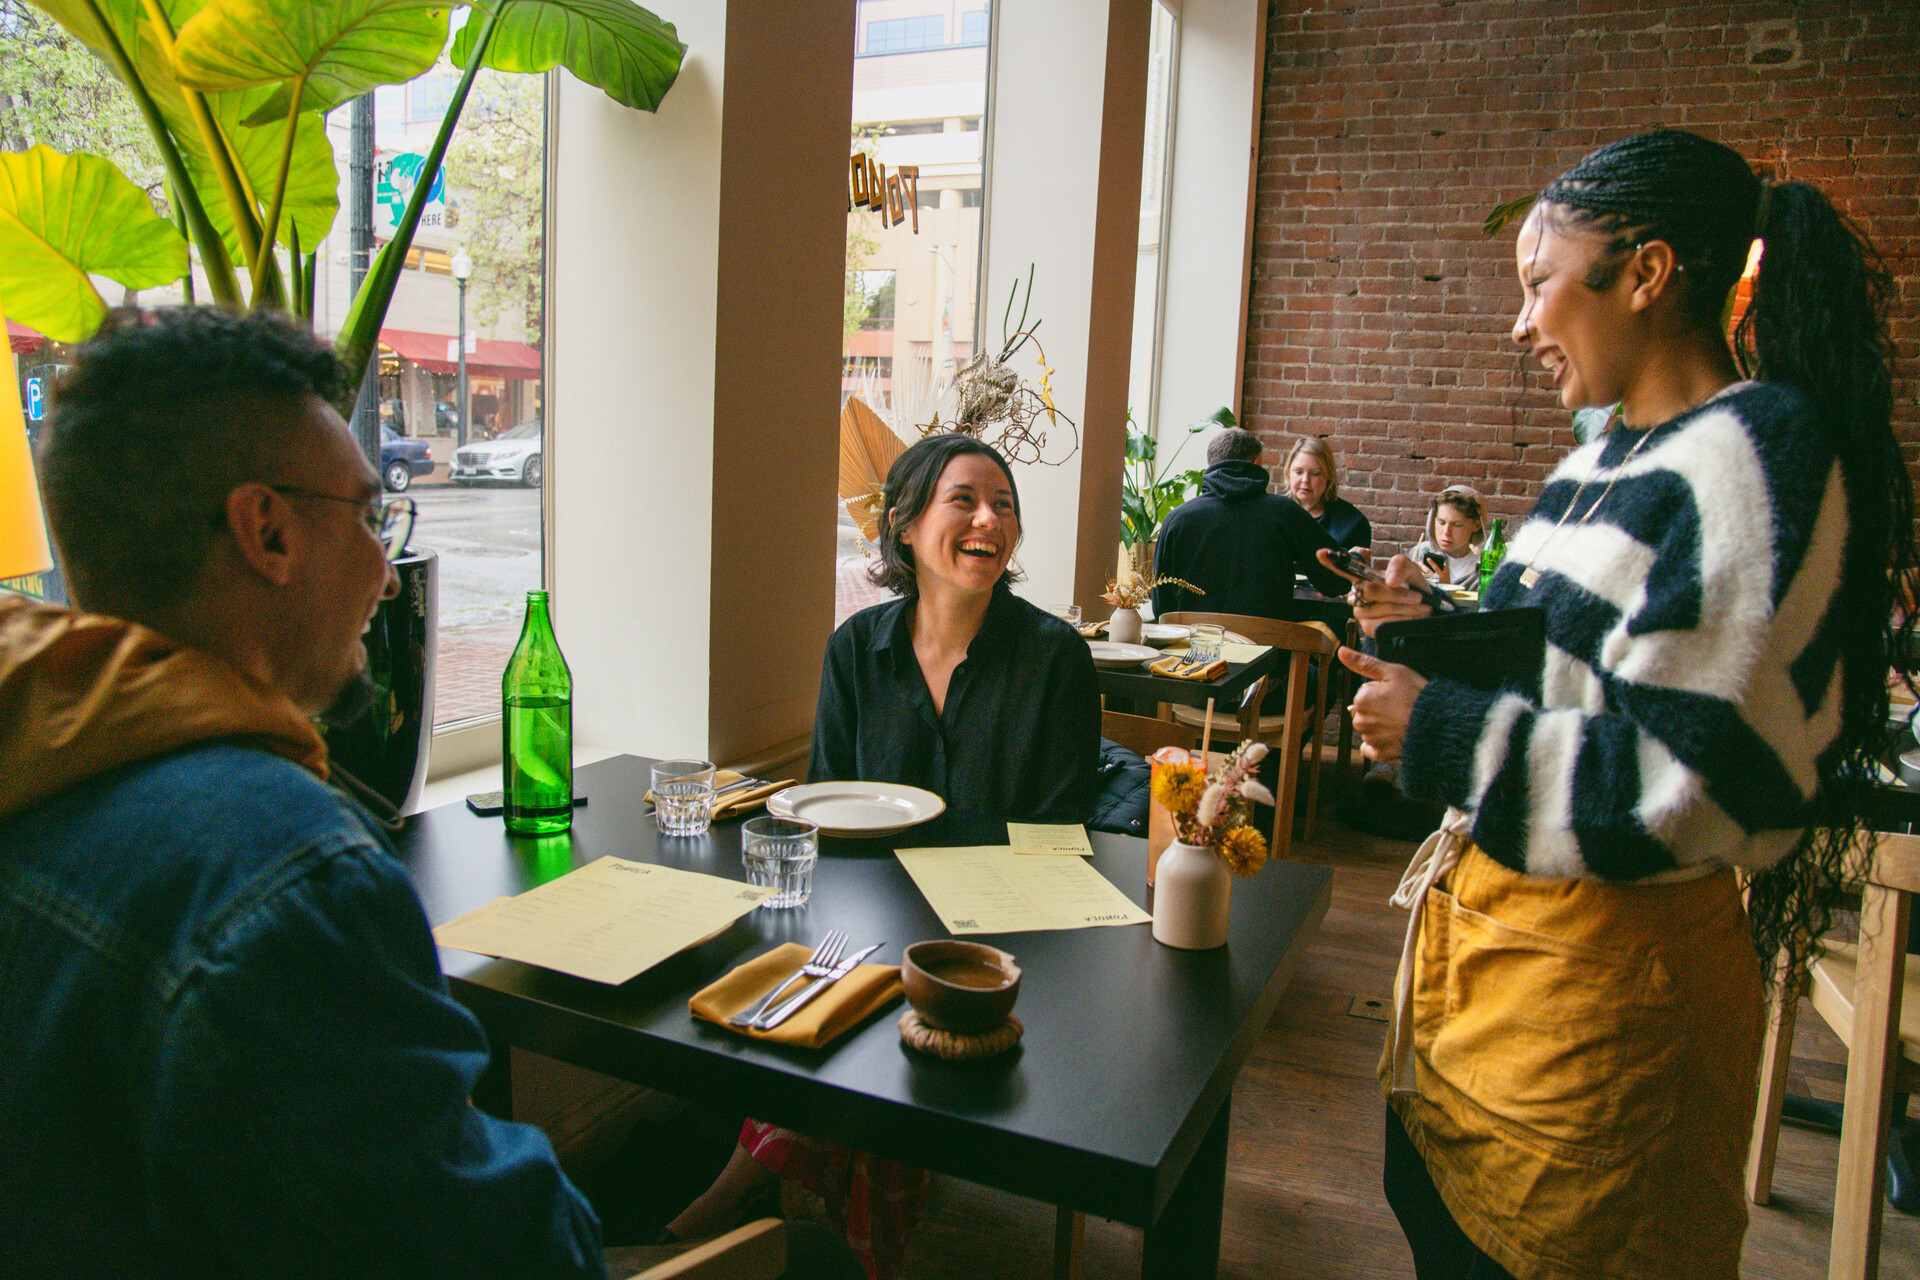 A restaurant server laughs as she takes an order from two customers sitting inside a sunny restaurant dining room.